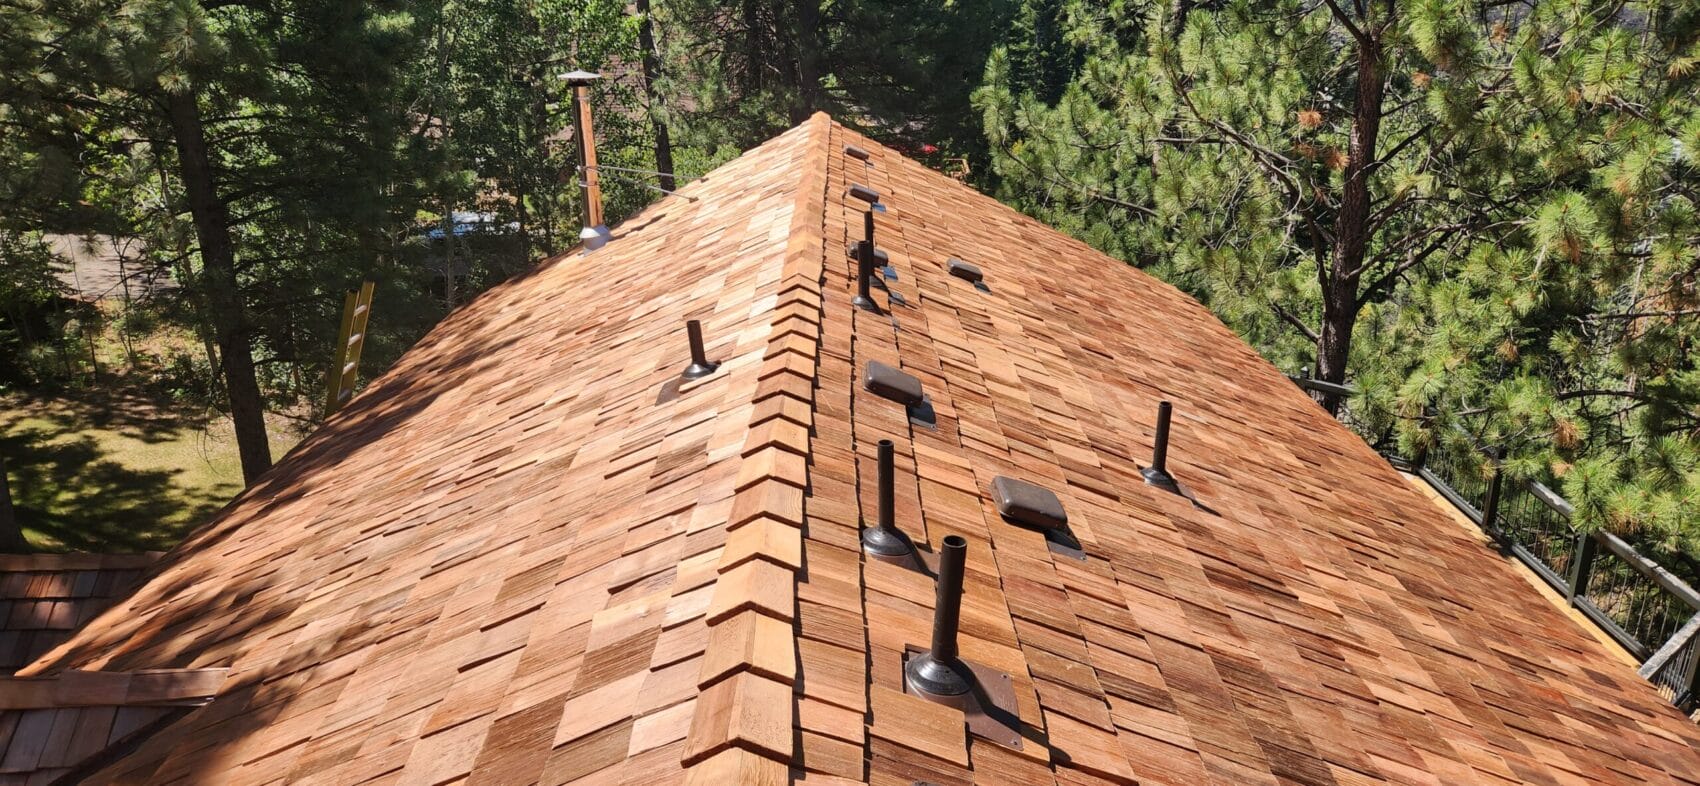 New Wooden shingle roof